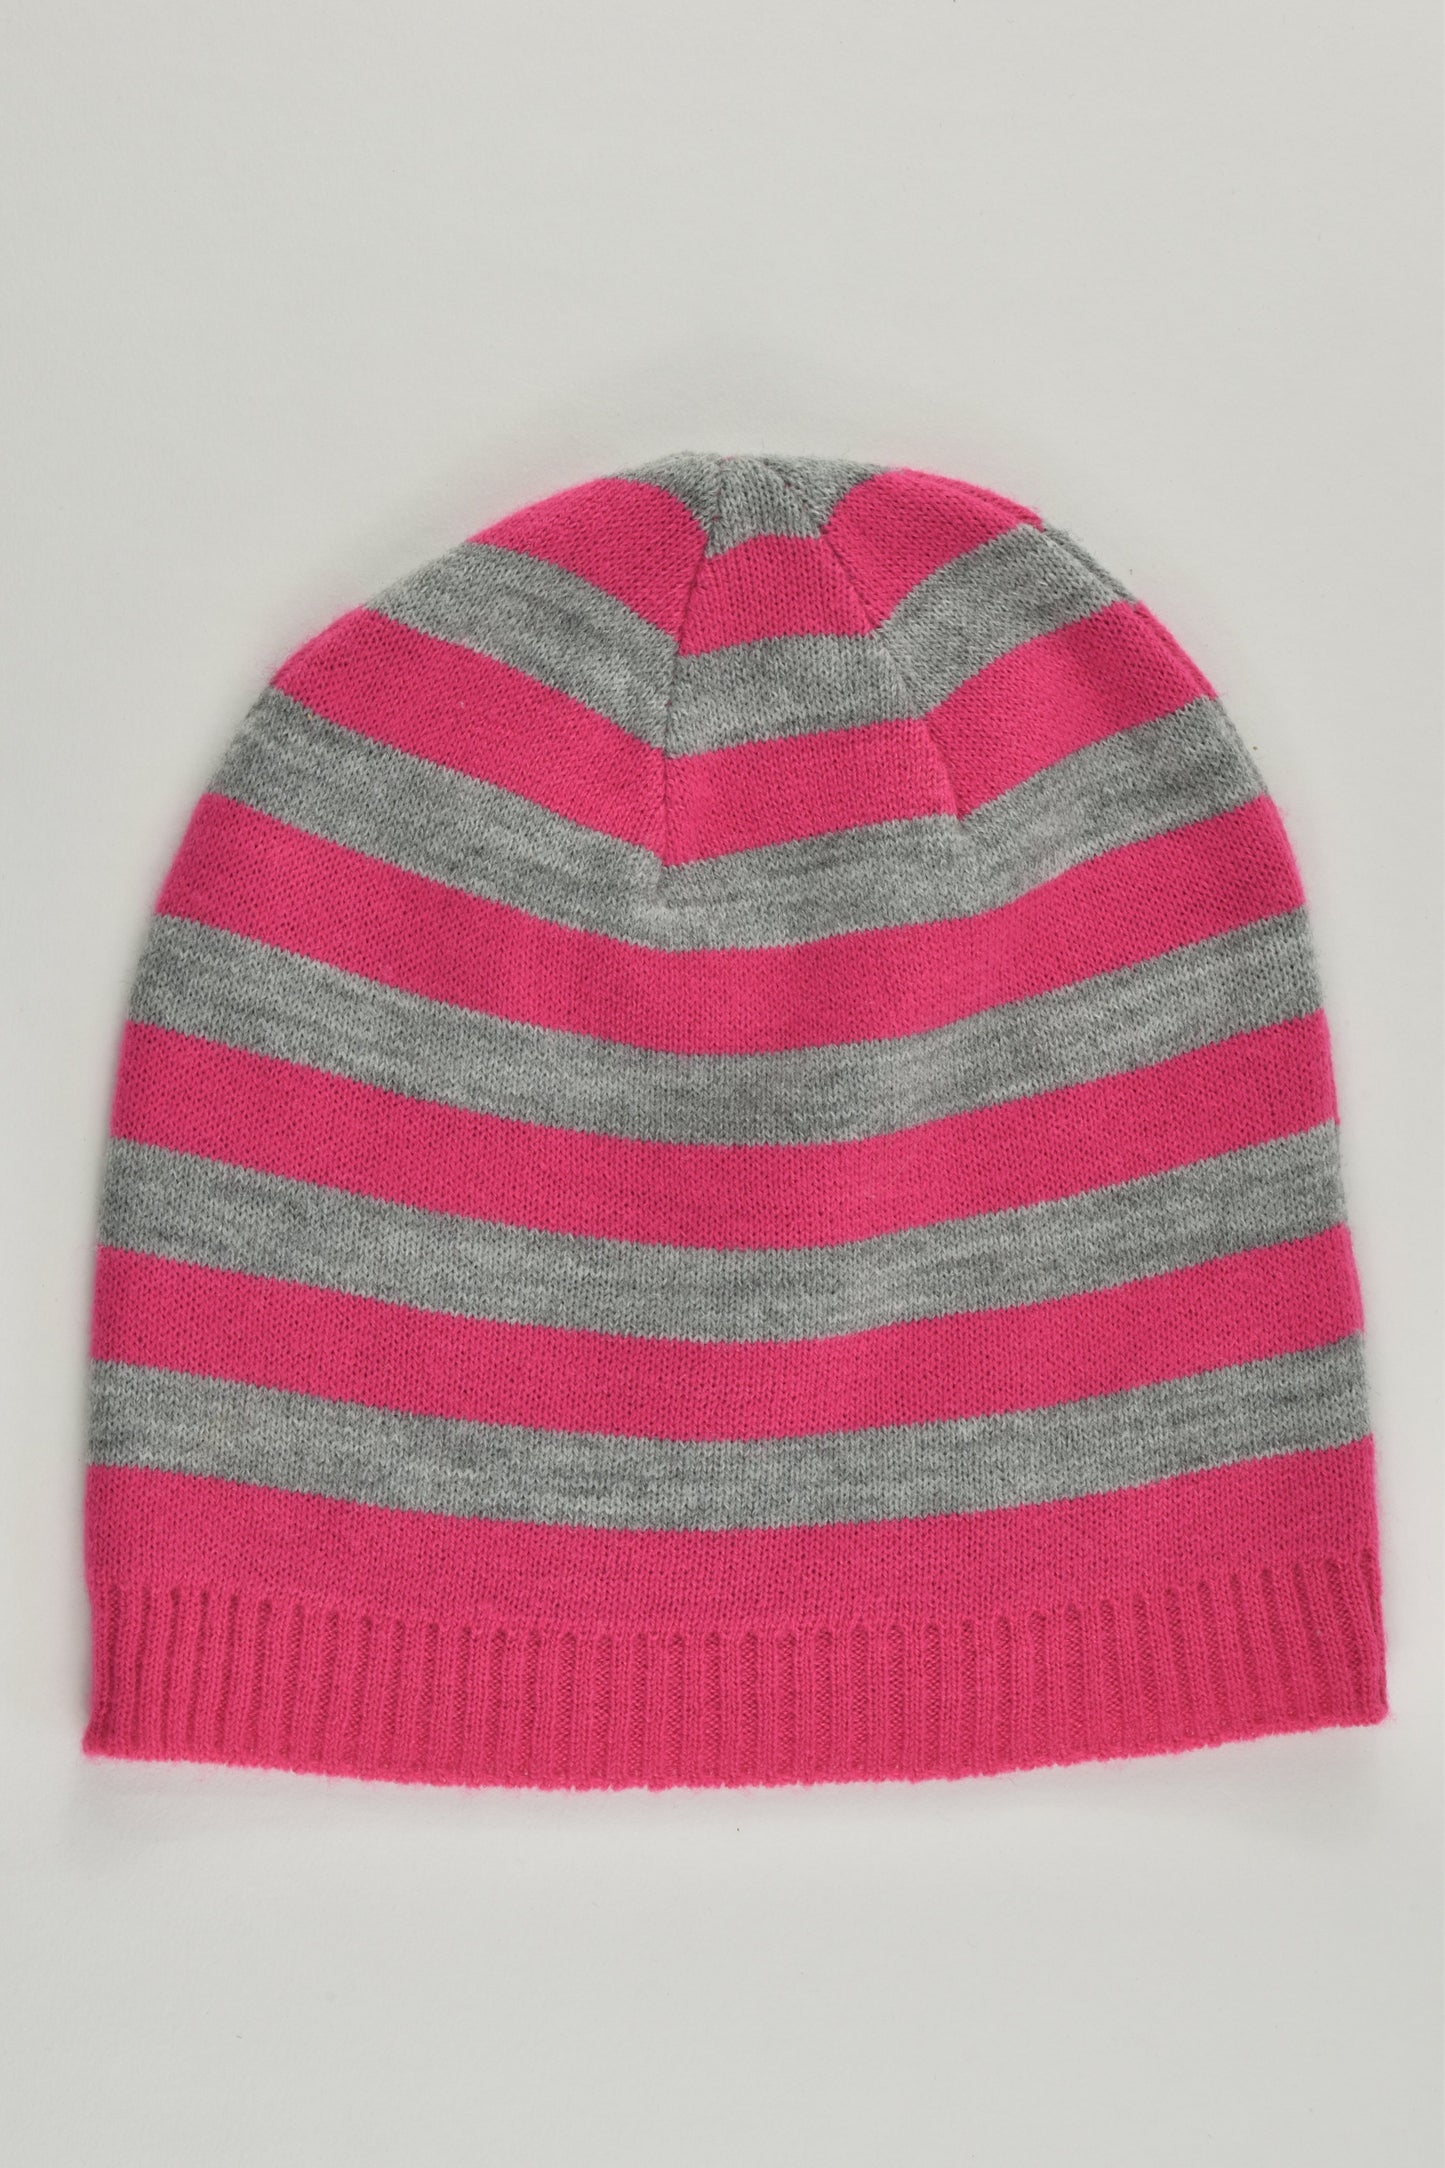 NEW Lindex Size approx 5-8 (52/54 cm) Striped Beanie with Love Heart